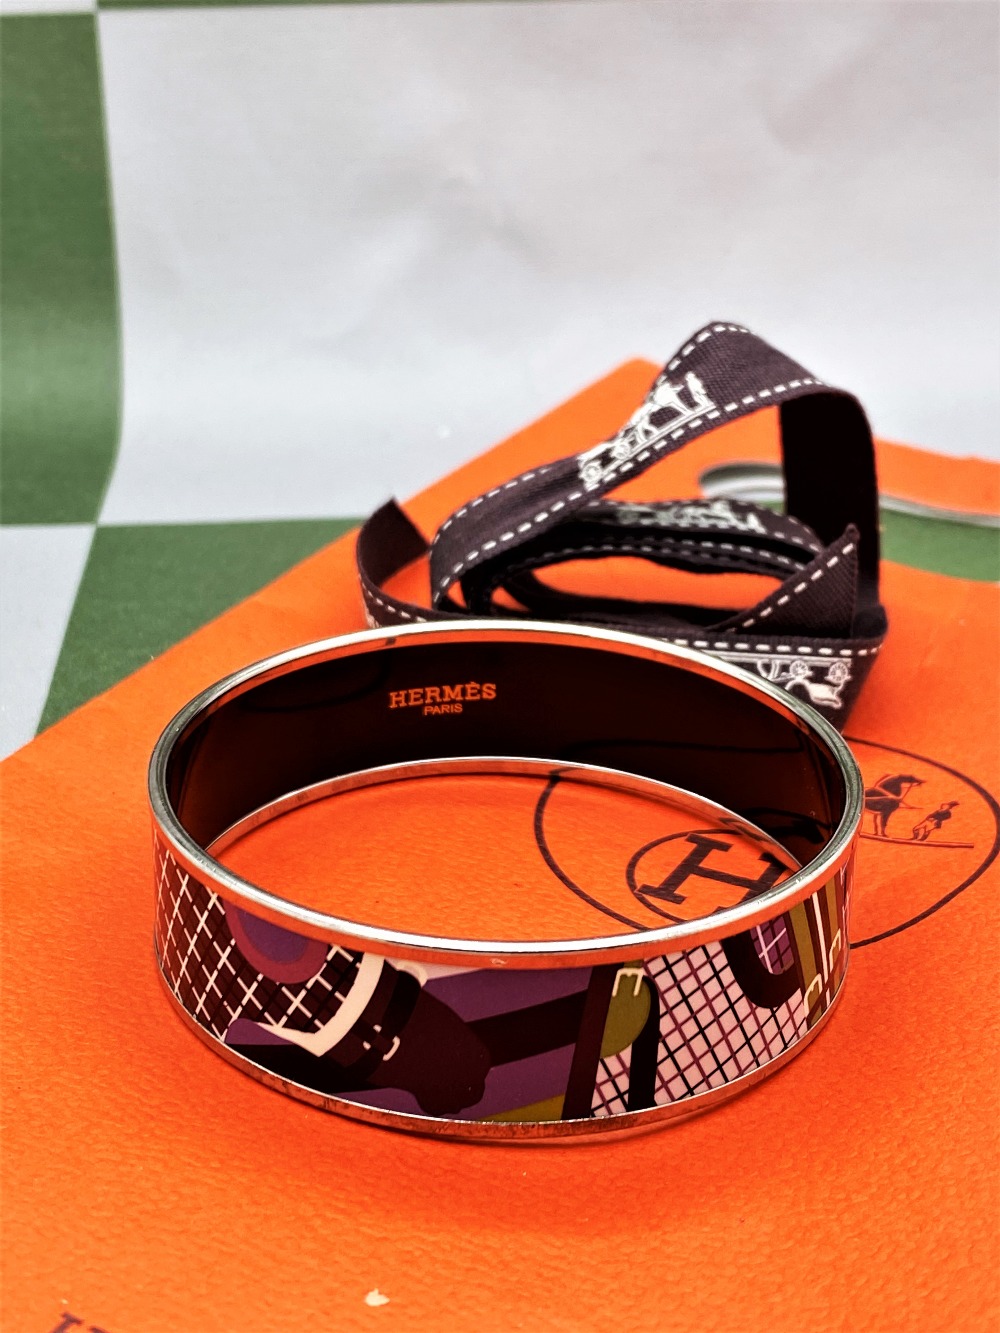 Hermes "Horses" Wide Late Edition Monogram & Silver Bangle - Image 2 of 7